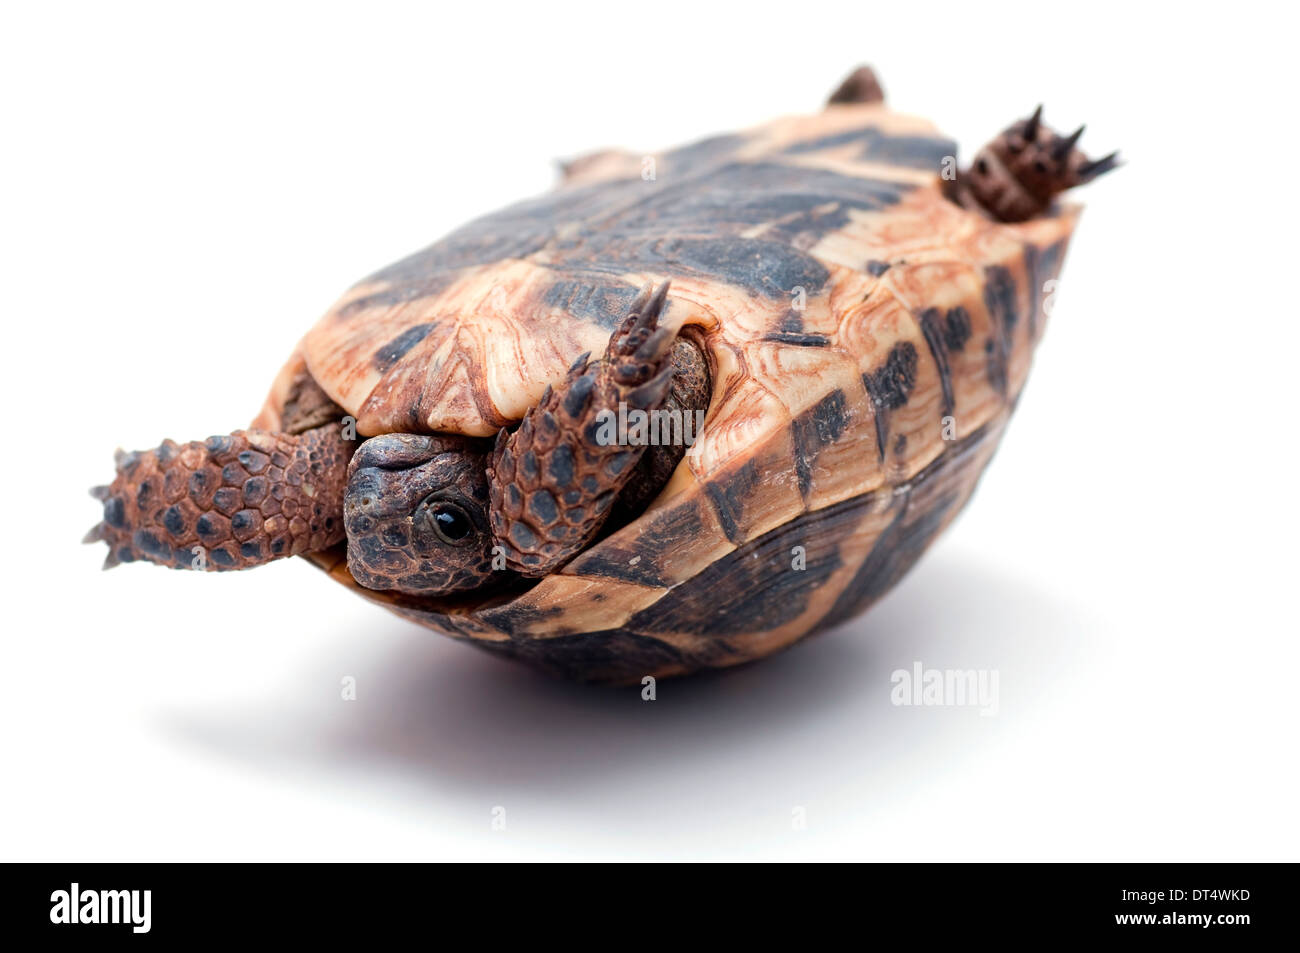 Turtle upside down, trying to turn over. Stock Photo